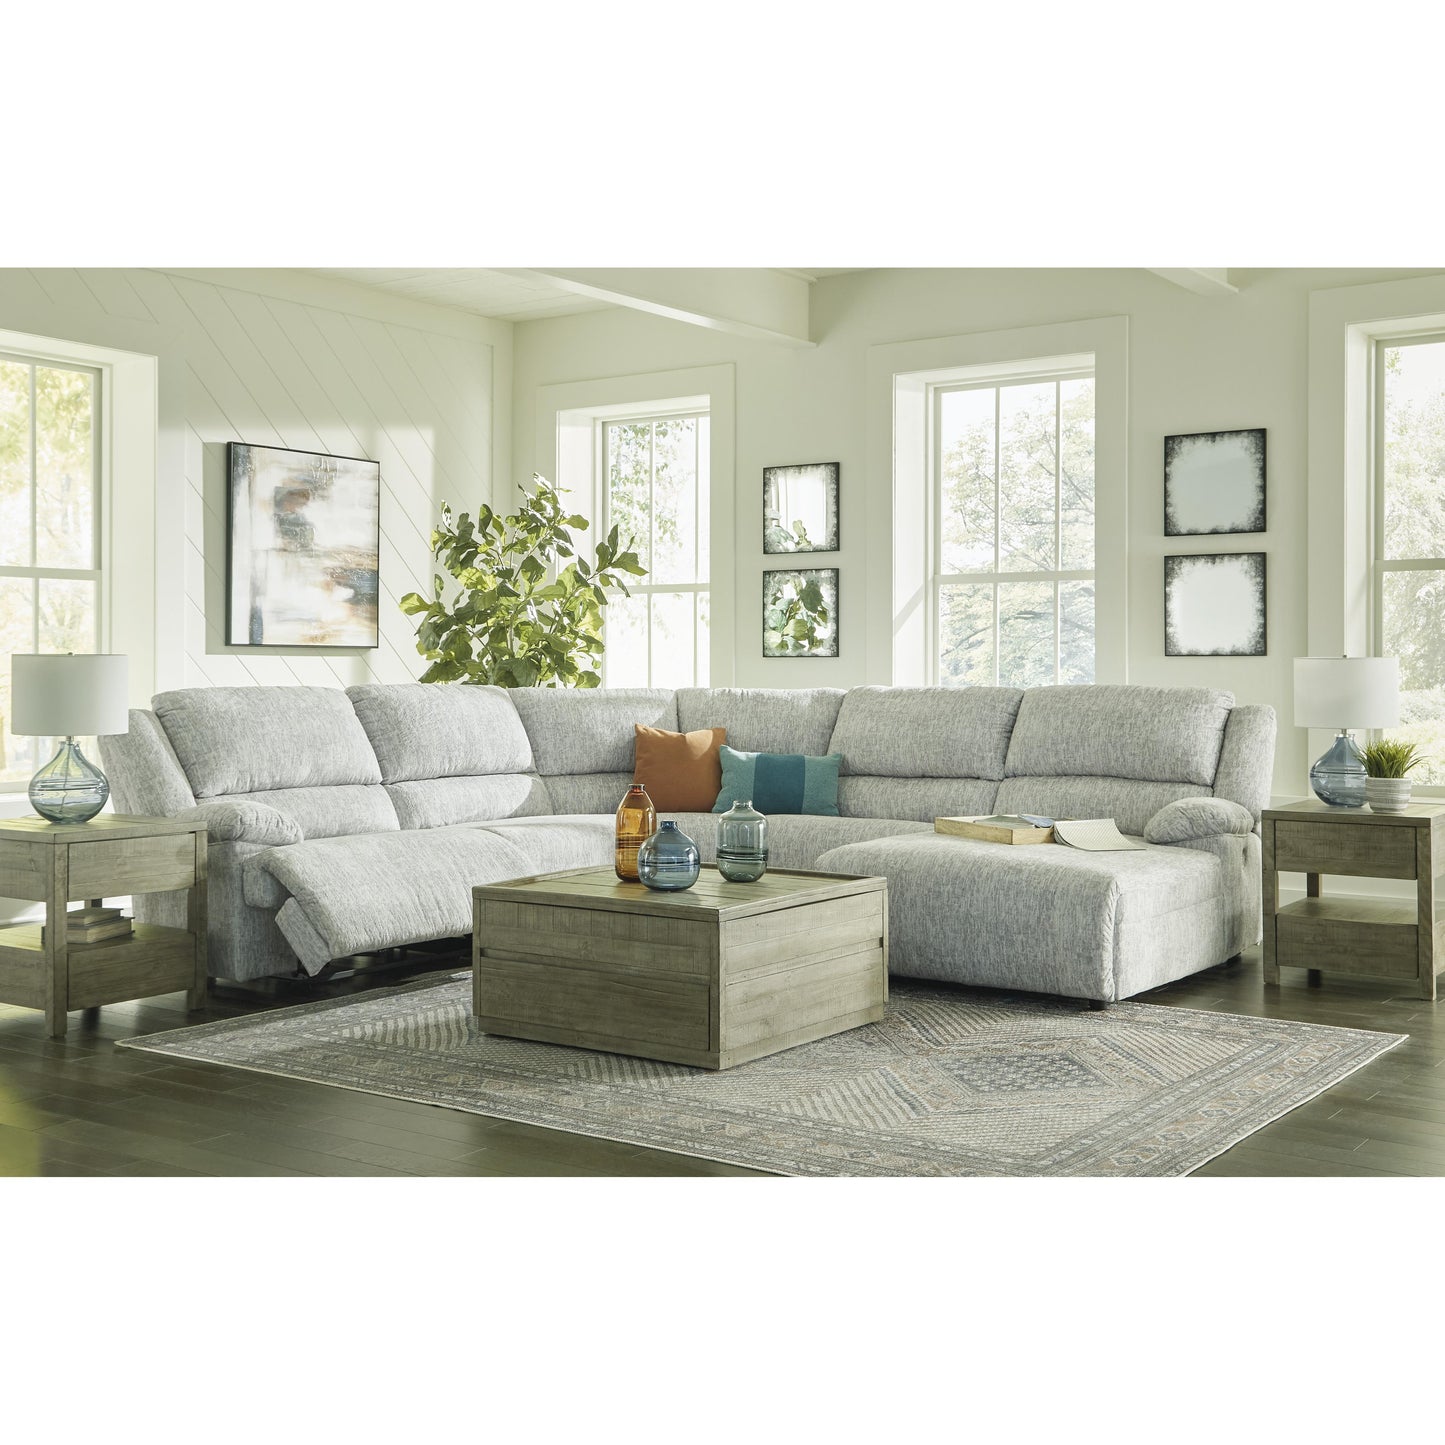 Signature Design by Ashley McClelland Power Reclining Fabric 5 pc Sectional 2930258/2930219/2930277/2930246/2930297 IMAGE 6